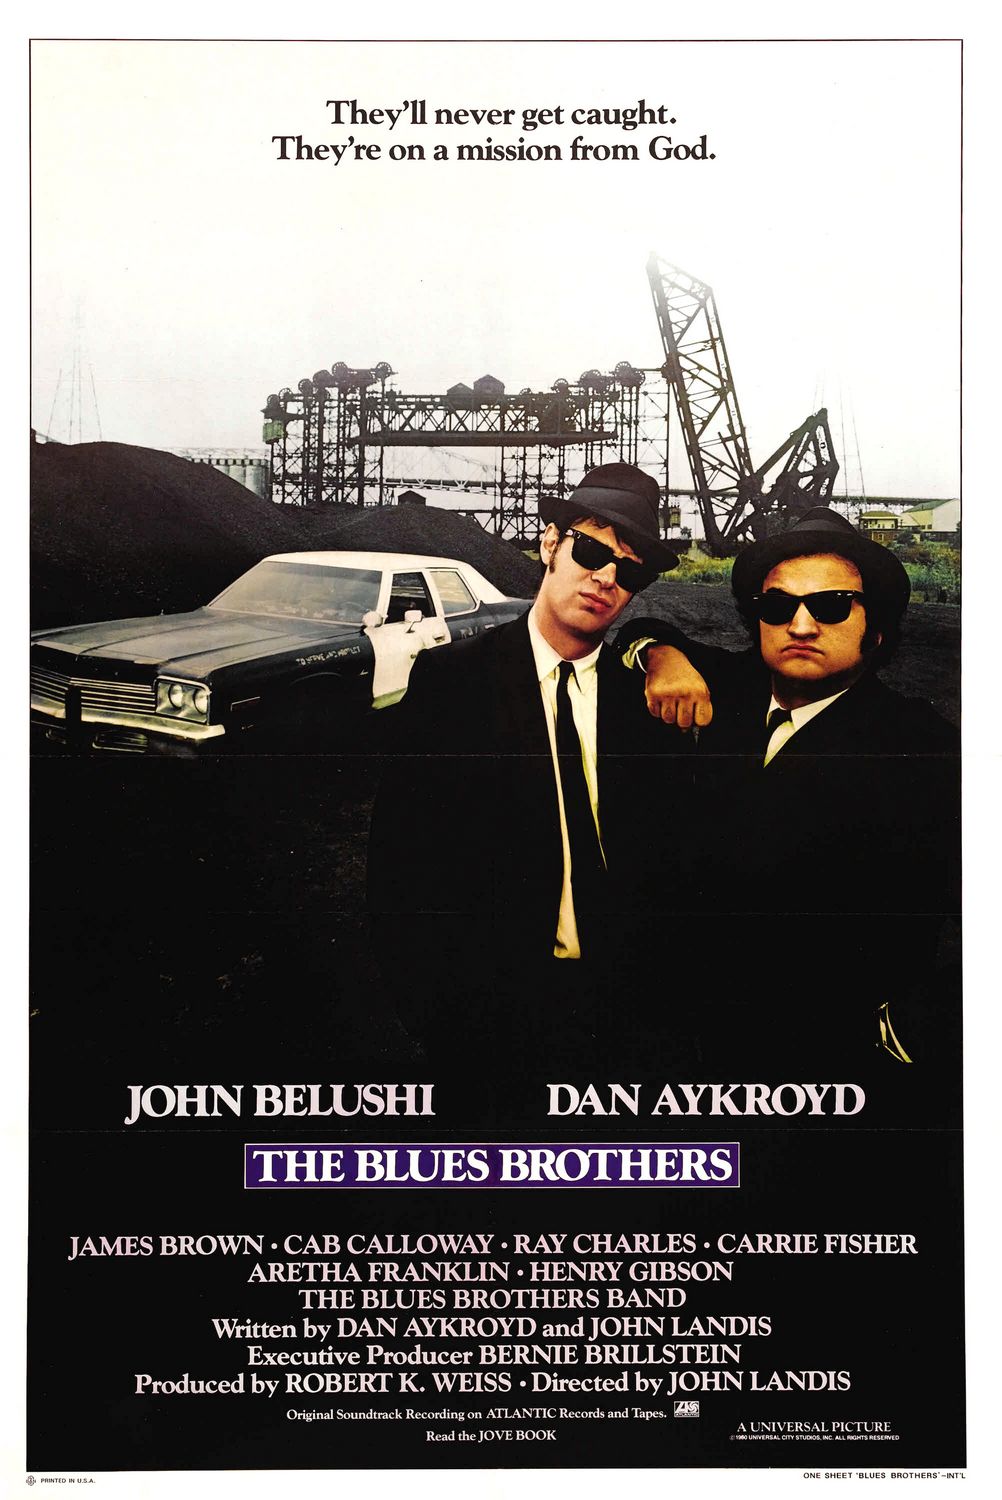 The Blues Brothers movie